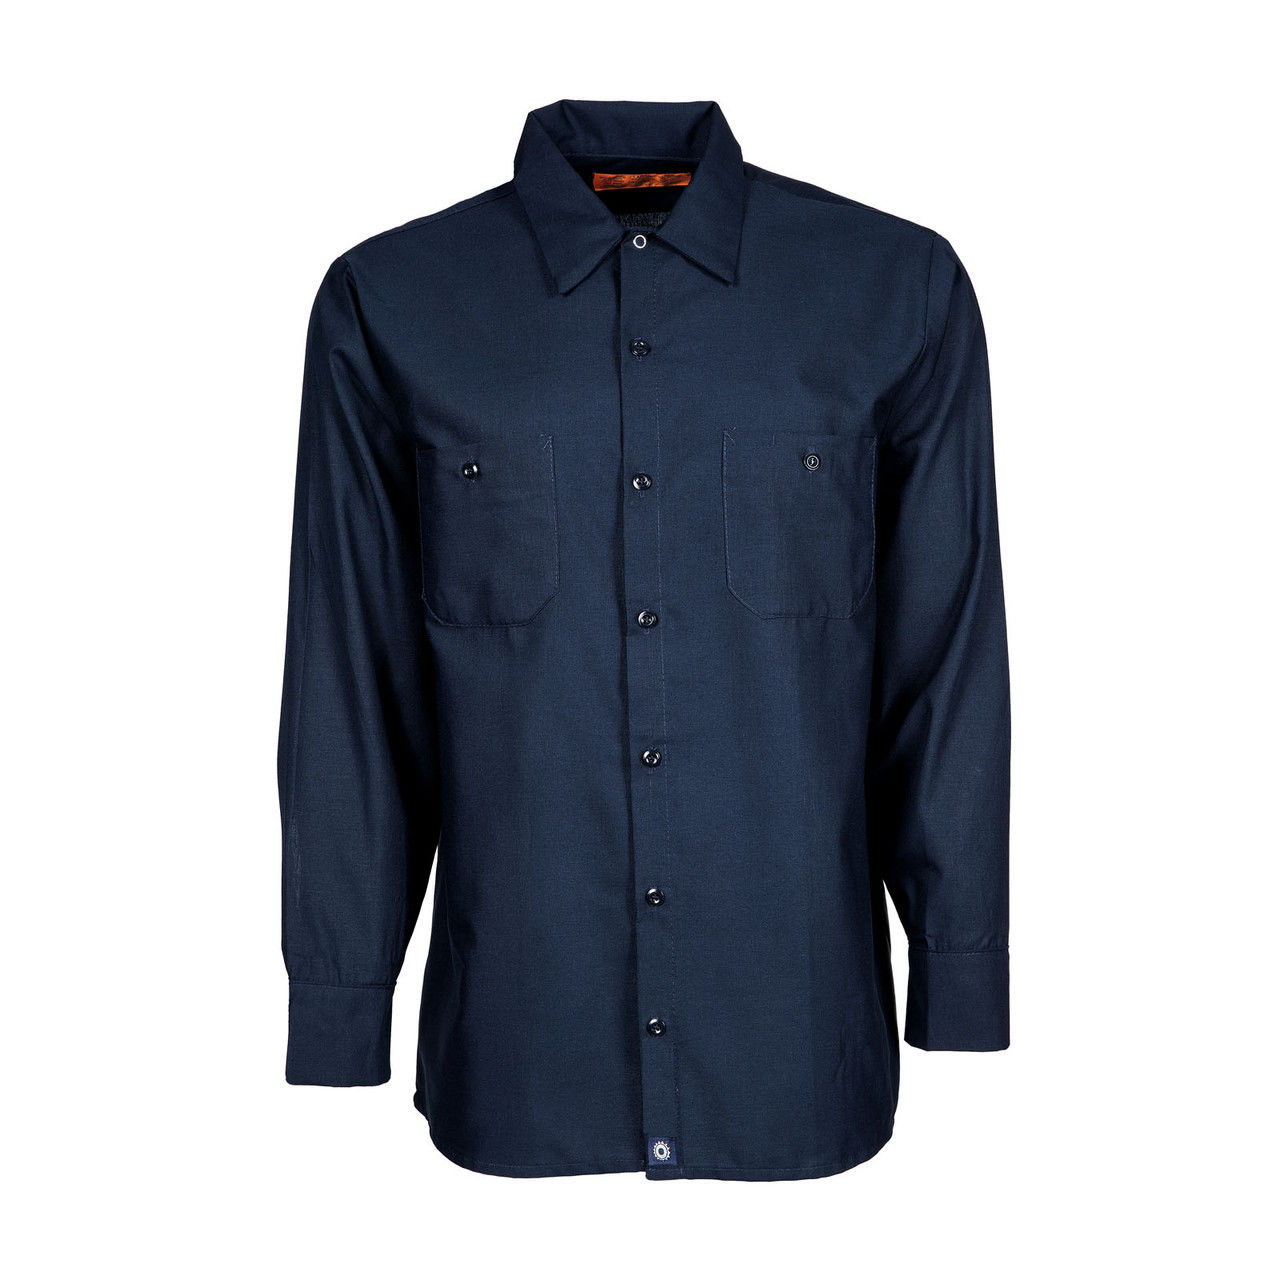 S10NV Men's Industrial Work Shirt, Navy Blue Questions & Answers